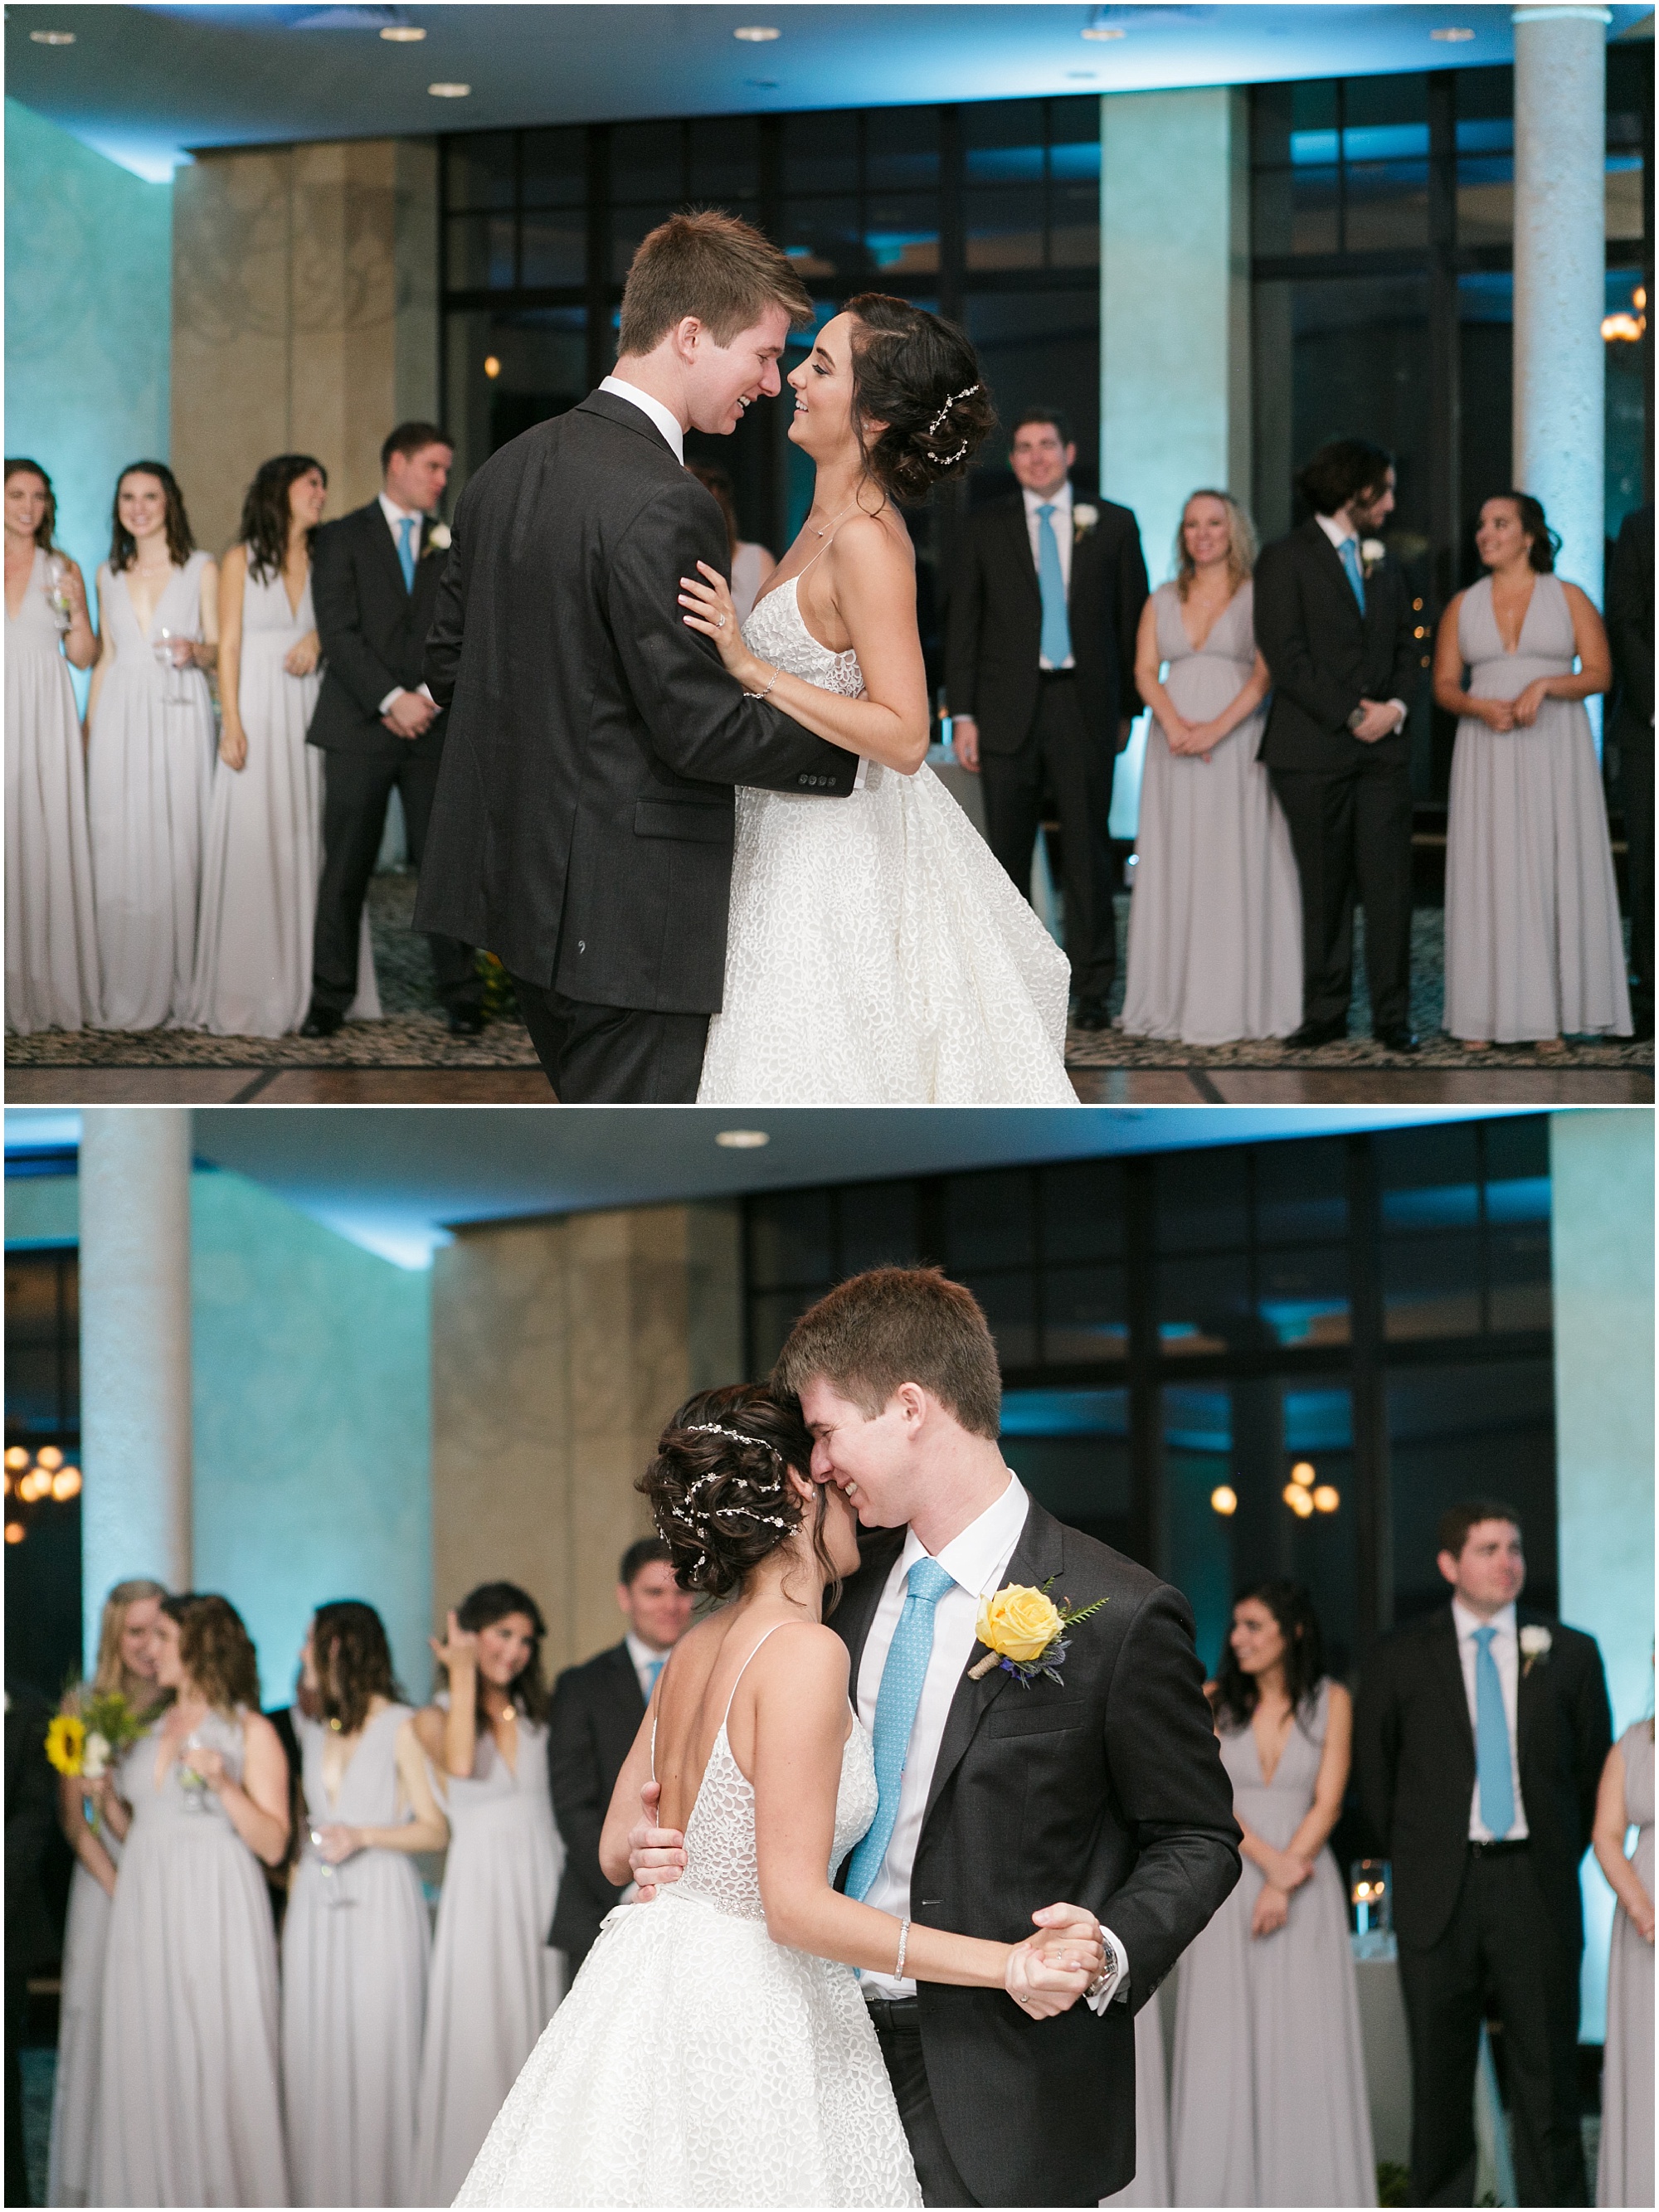 Bride and groom sharing their first dance together. 